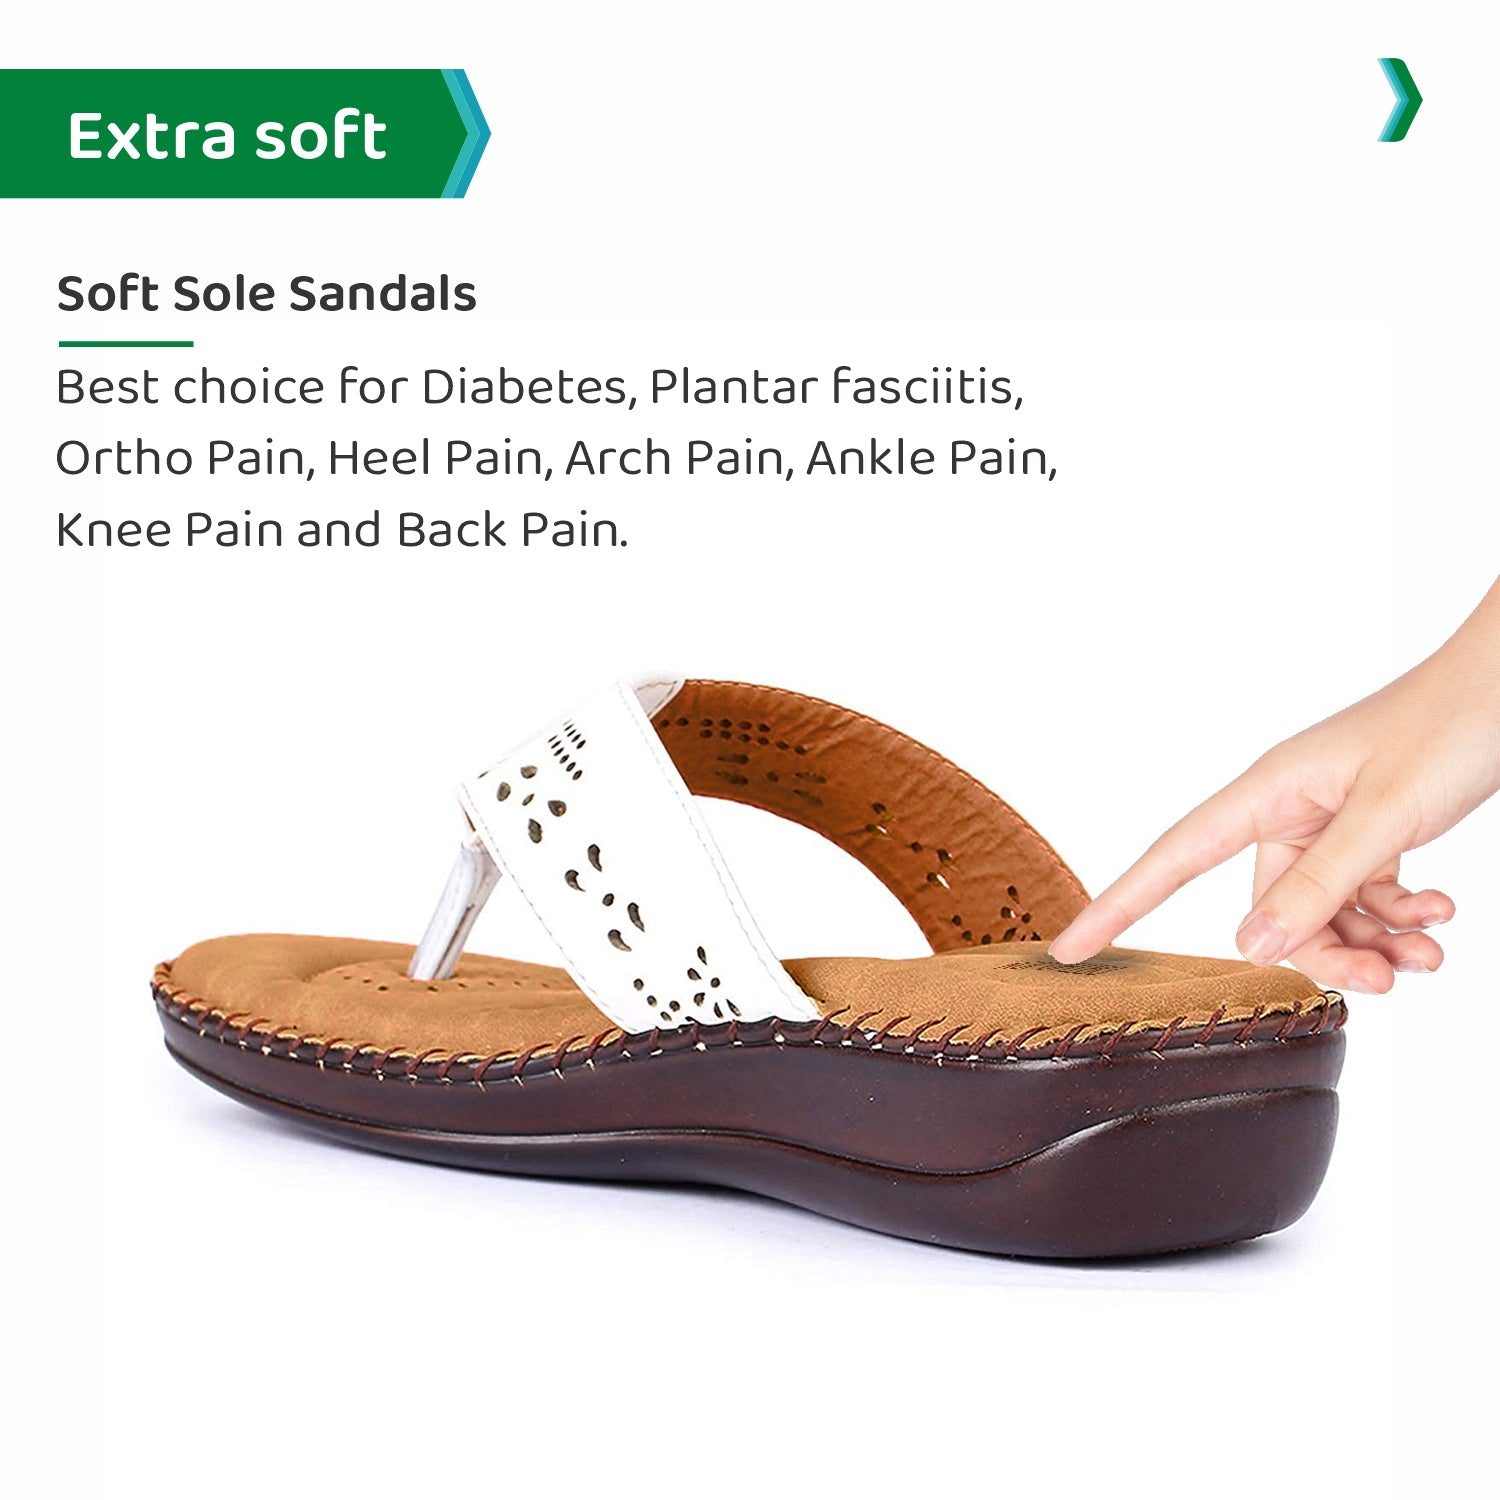 Buy DOCTOR EXTRA SOFT Brown Ortho Care Orthopedic Diabetic Comfortable Dr  Sole Footwear Daily Use Casual Home Wear Stylish Latest Black Cushioned One  Toe Ring Thump Chappal-Sandals-Slippers for Men's-Gents-Boy's L-5 Online at